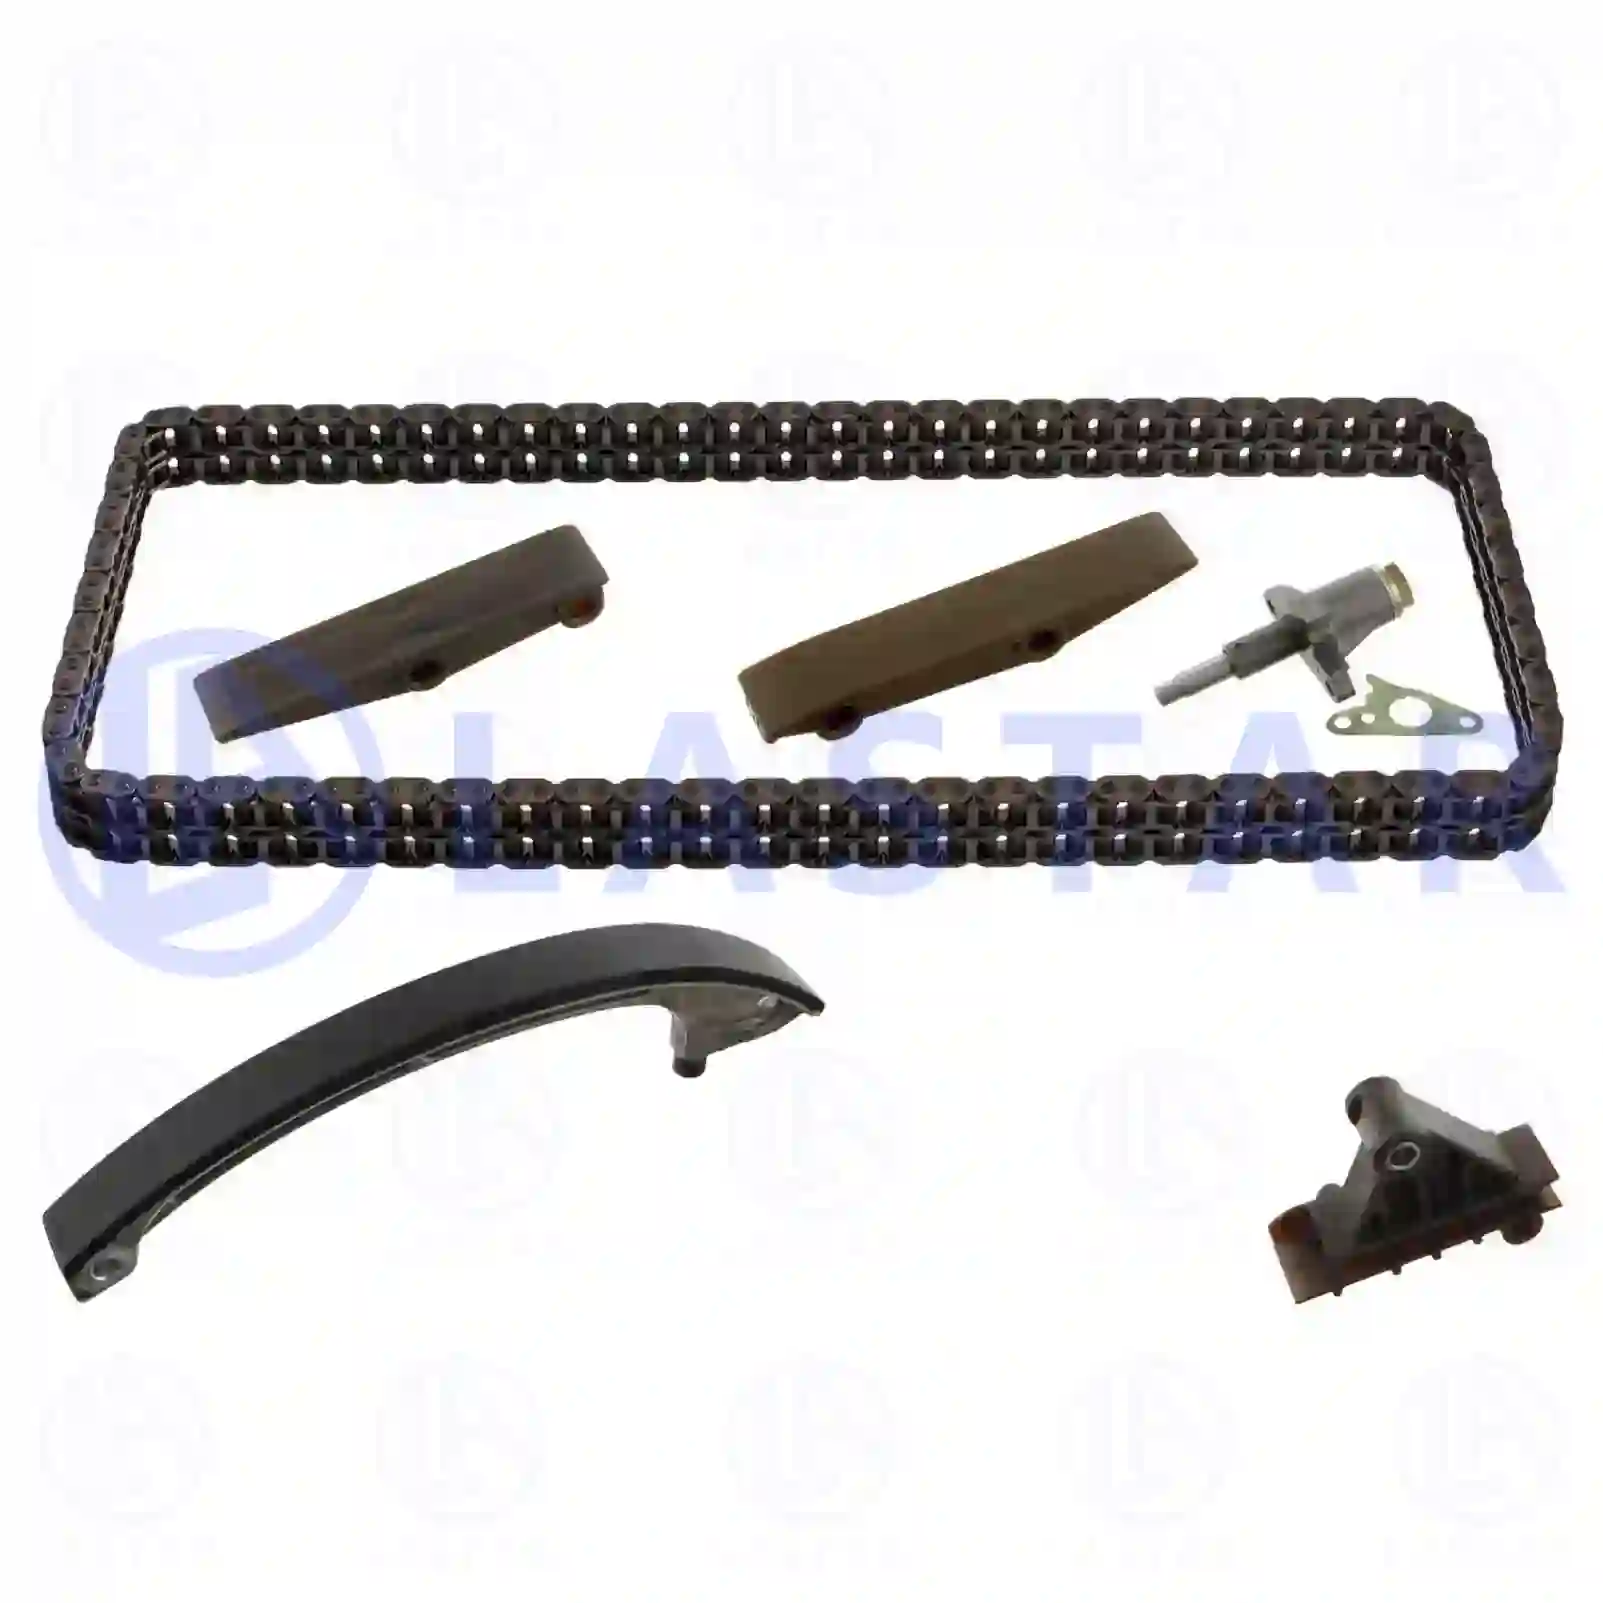 Timing chain kit, with chain lock, 77702662, 6150500811S1 ||  77702662 Lastar Spare Part | Truck Spare Parts, Auotomotive Spare Parts Timing chain kit, with chain lock, 77702662, 6150500811S1 ||  77702662 Lastar Spare Part | Truck Spare Parts, Auotomotive Spare Parts